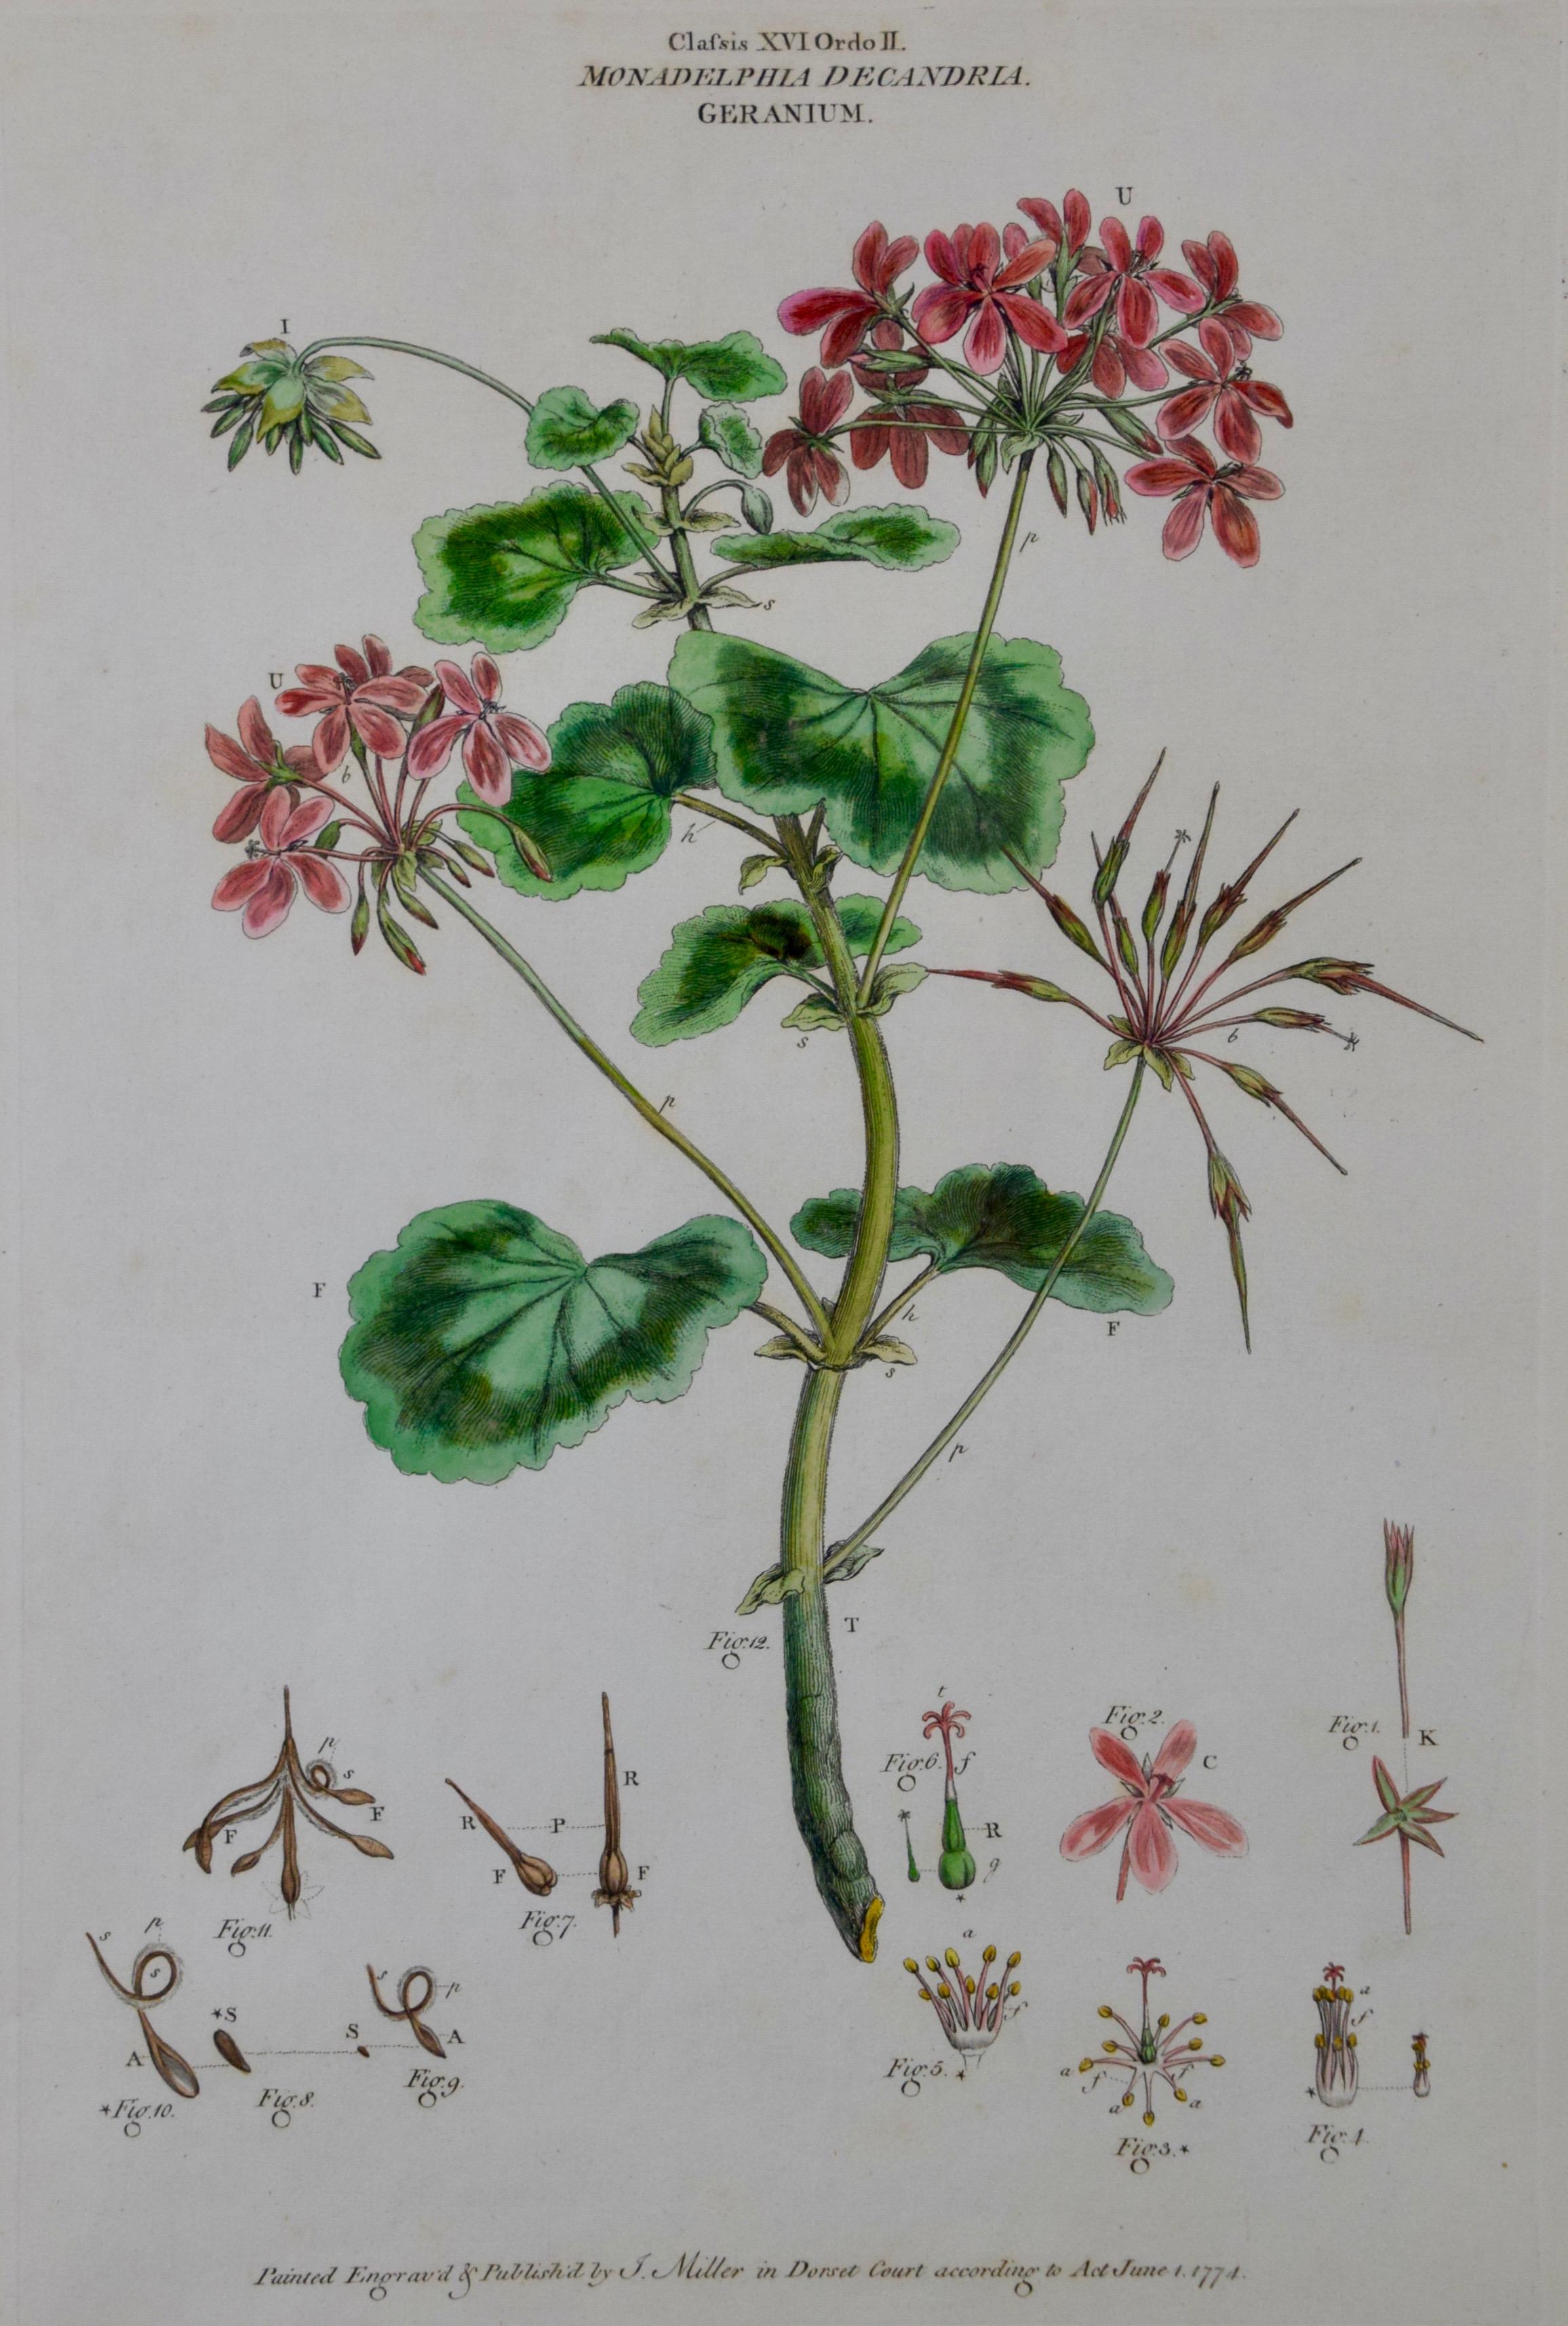 A pair of hand-colored 18th century engravings of Columbine and Geranium Flowers, published in London in 1770 by John Miller. These engravings are presented in identical attractive gold-colored wood frames with gold-colored fillets and rose-colored